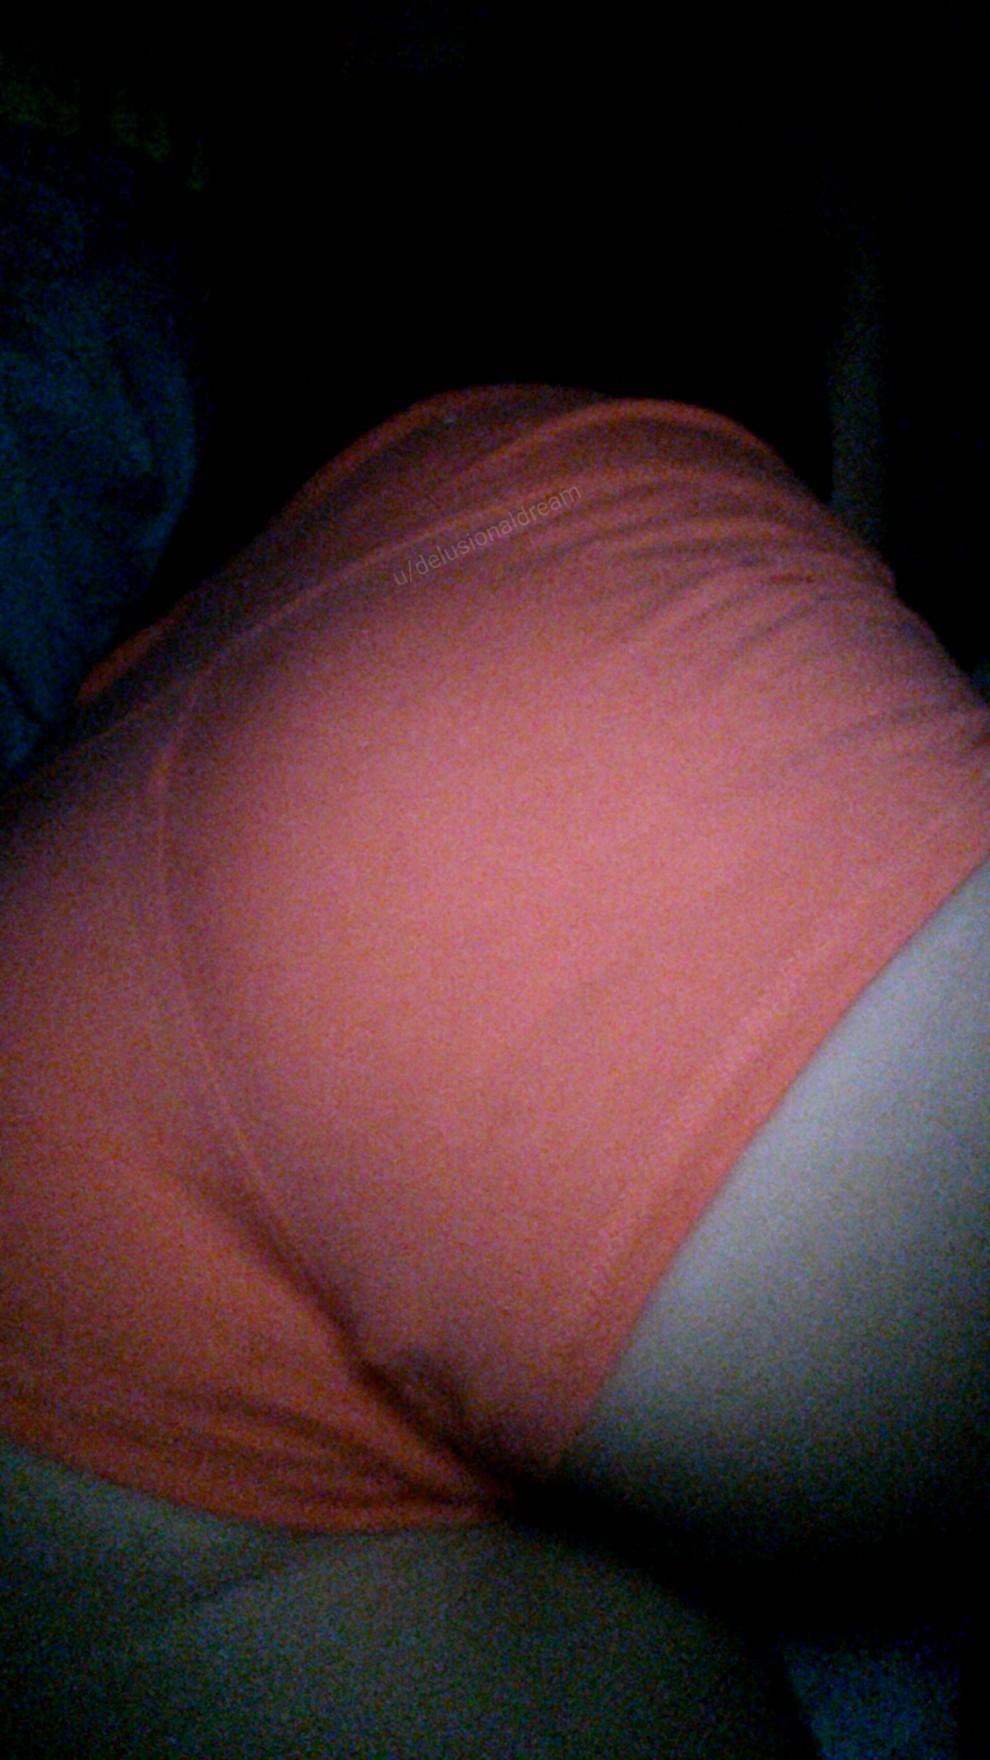 Can't lose me in the dark with these on (f)